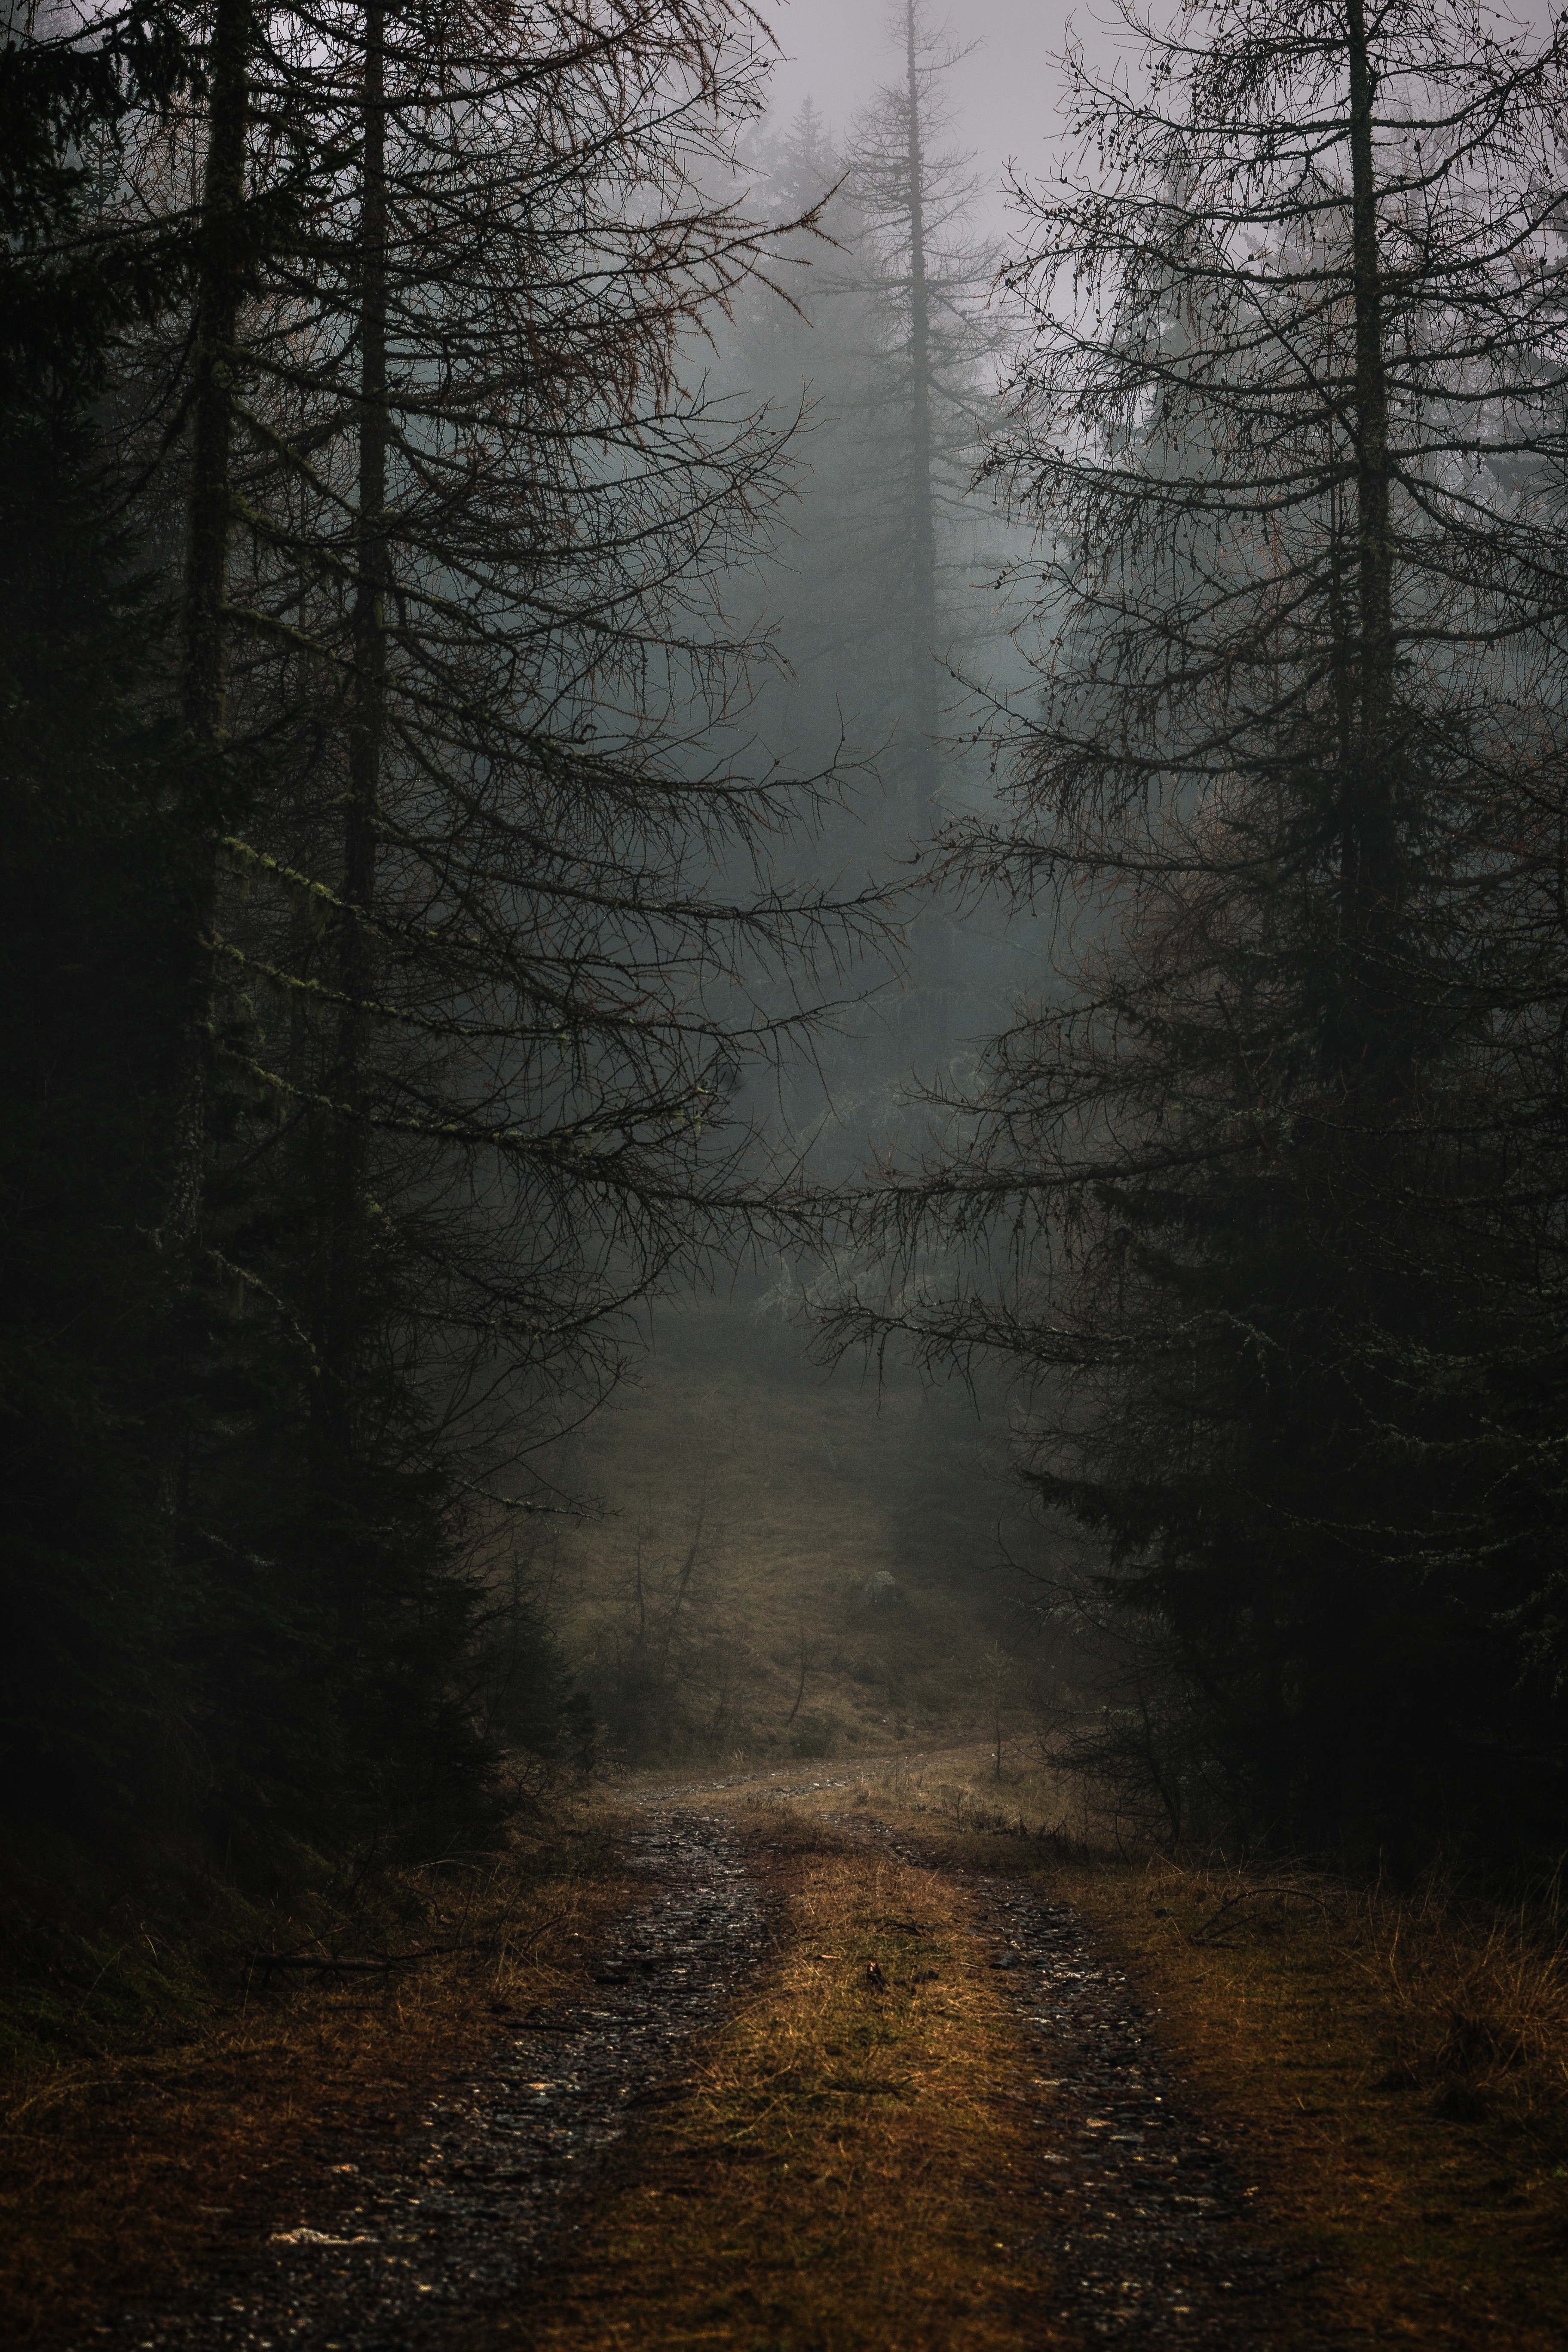 autumn, fog, gloomy, nature, trees, forest, branches, path